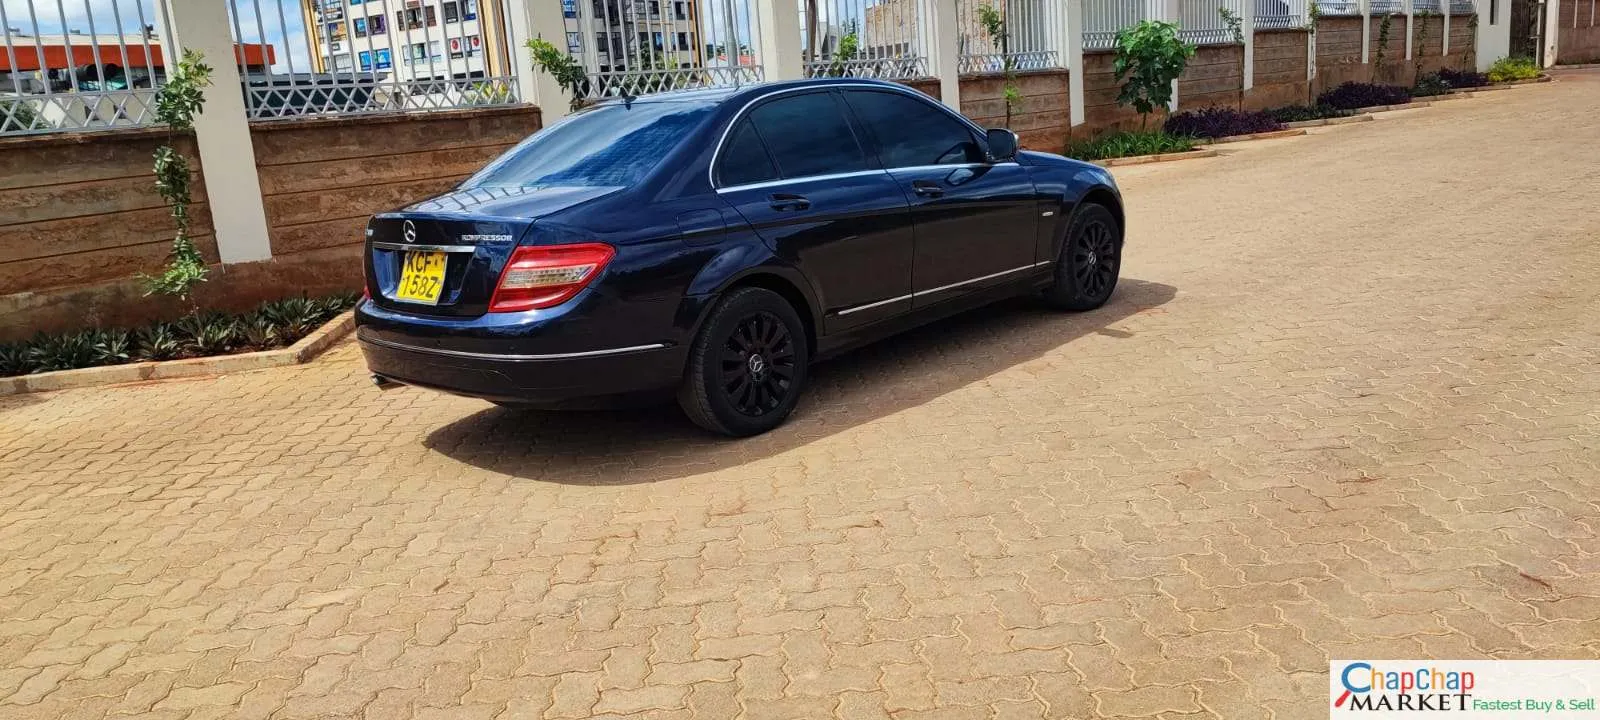 Mercedes Benz C200 for sale in Kenya 🔥 You Pay 30% DEPOSIT Trade in OK EXCLUSIVE